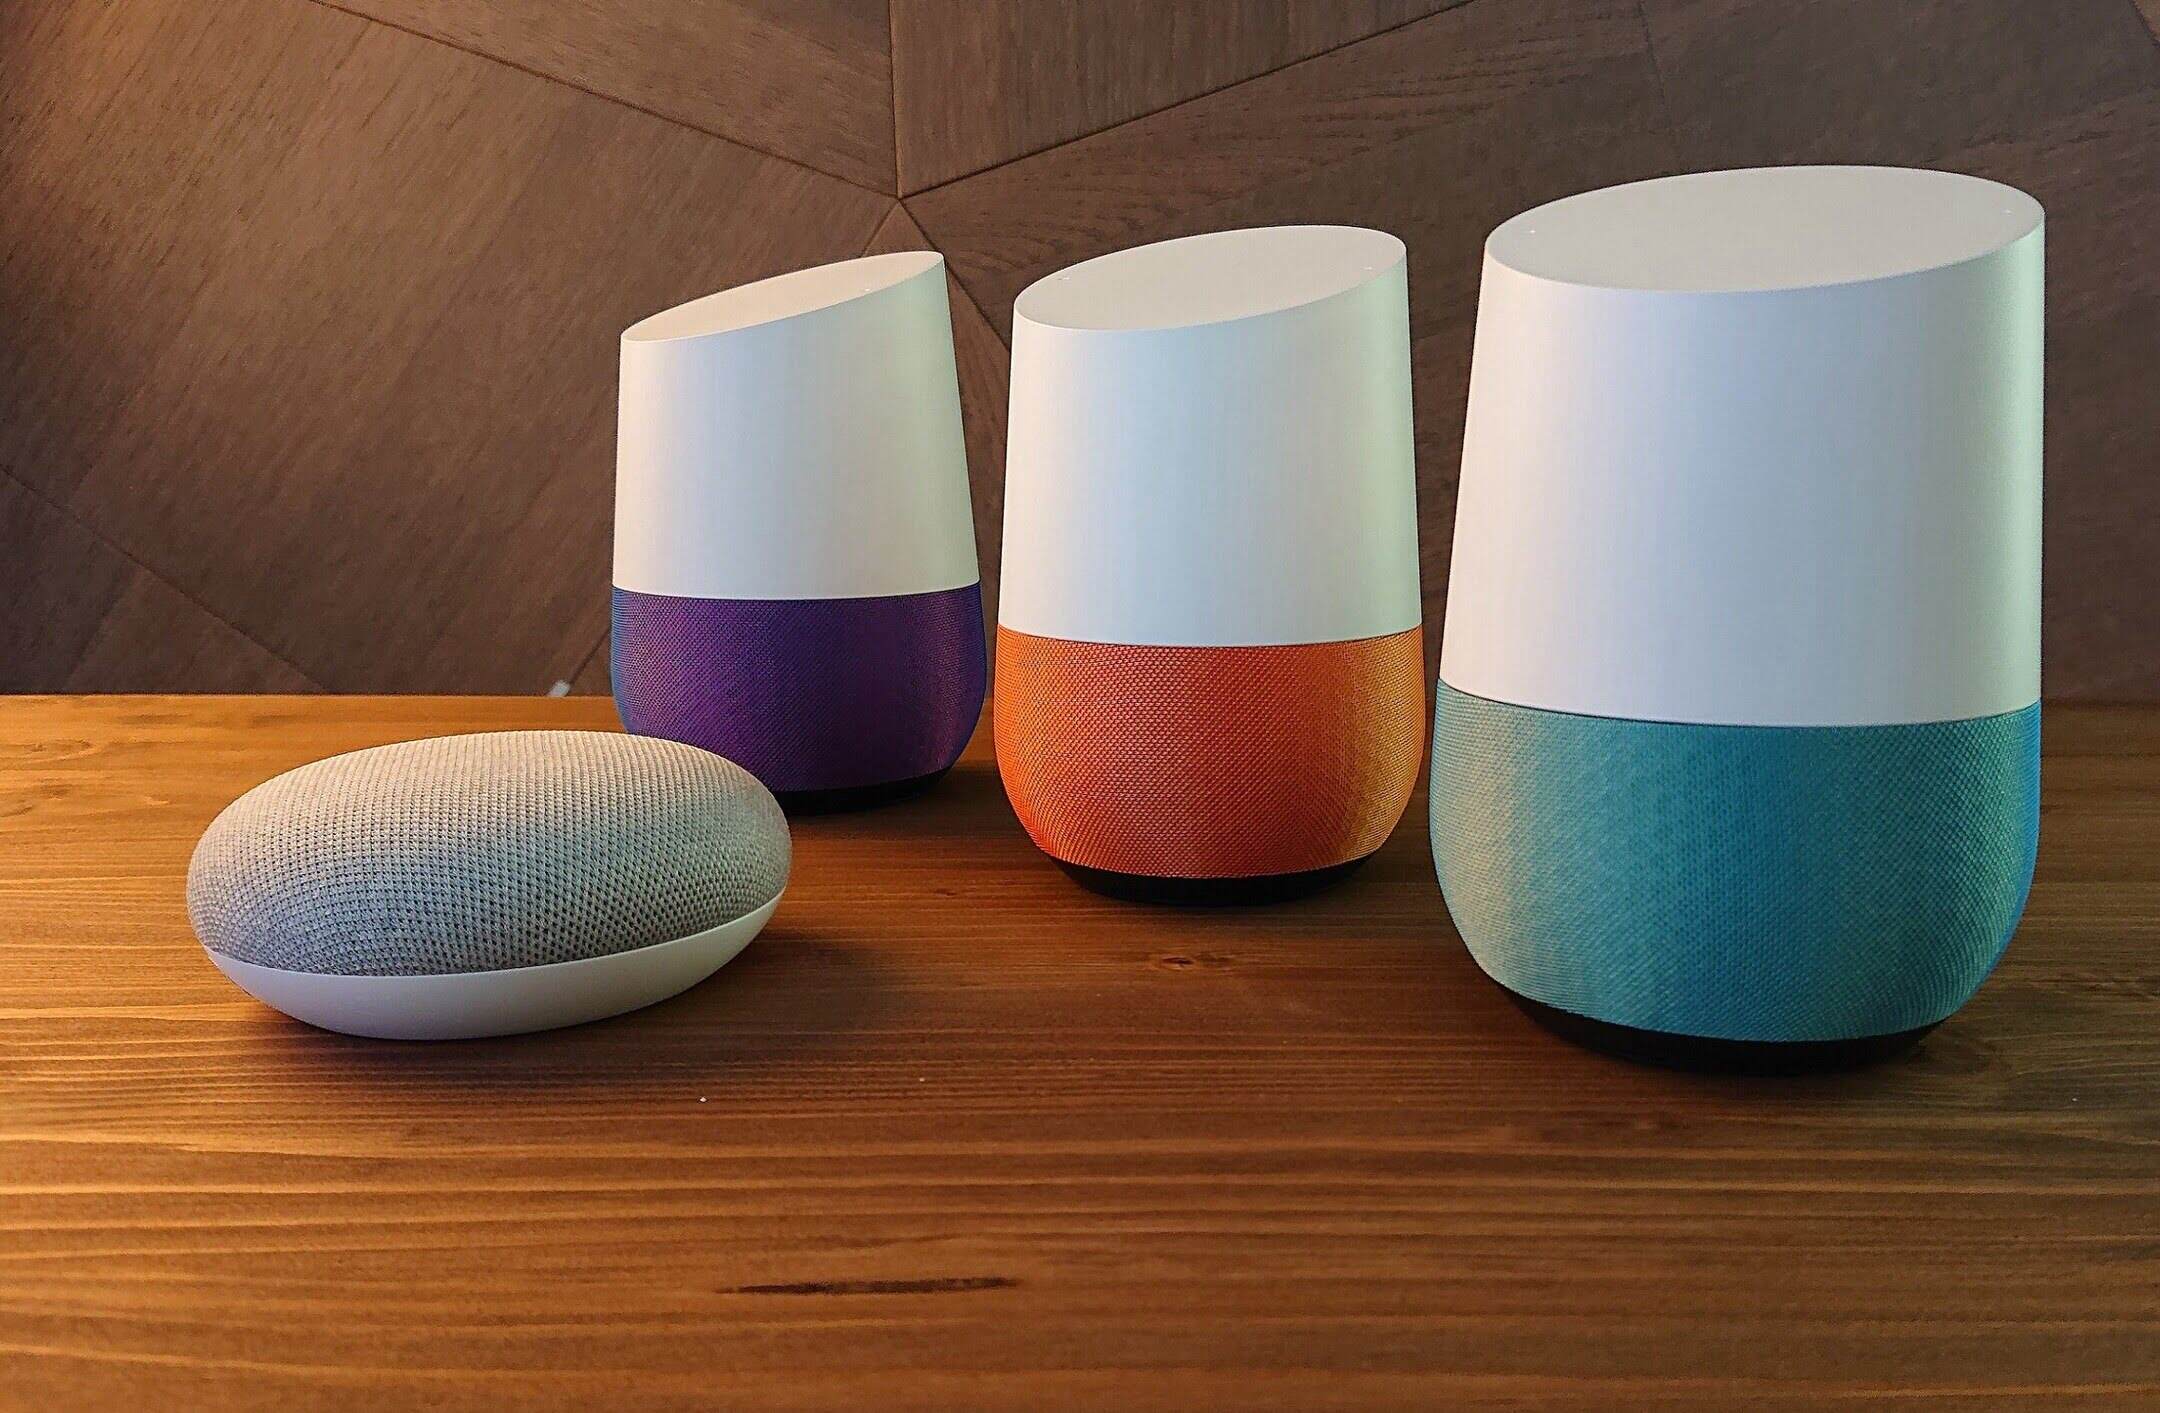 Why Does My Google Home Keep Disconnecting